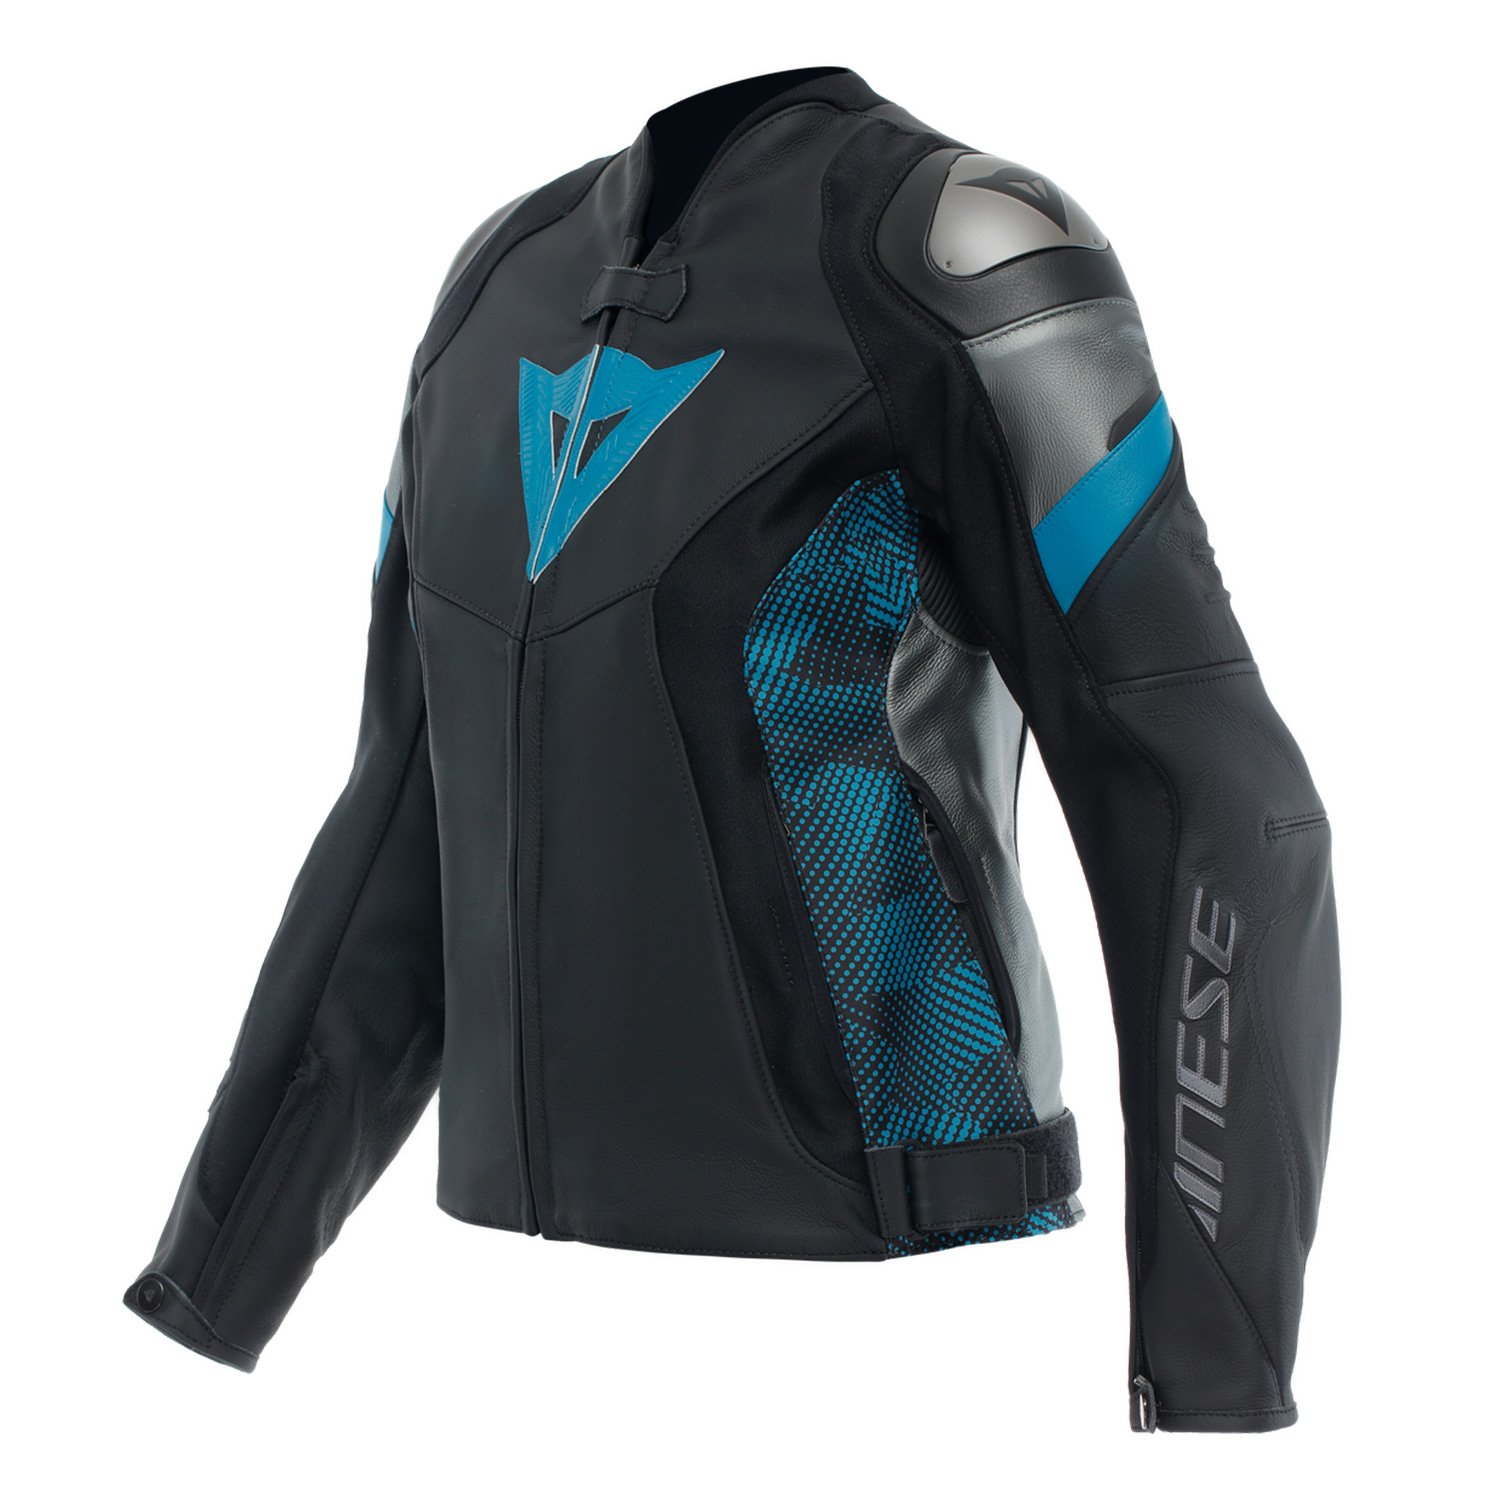 Image of Dainese Avro 5 Leather Jacket WMN Black Teal Anthracite Size 44 ID 8051019639851